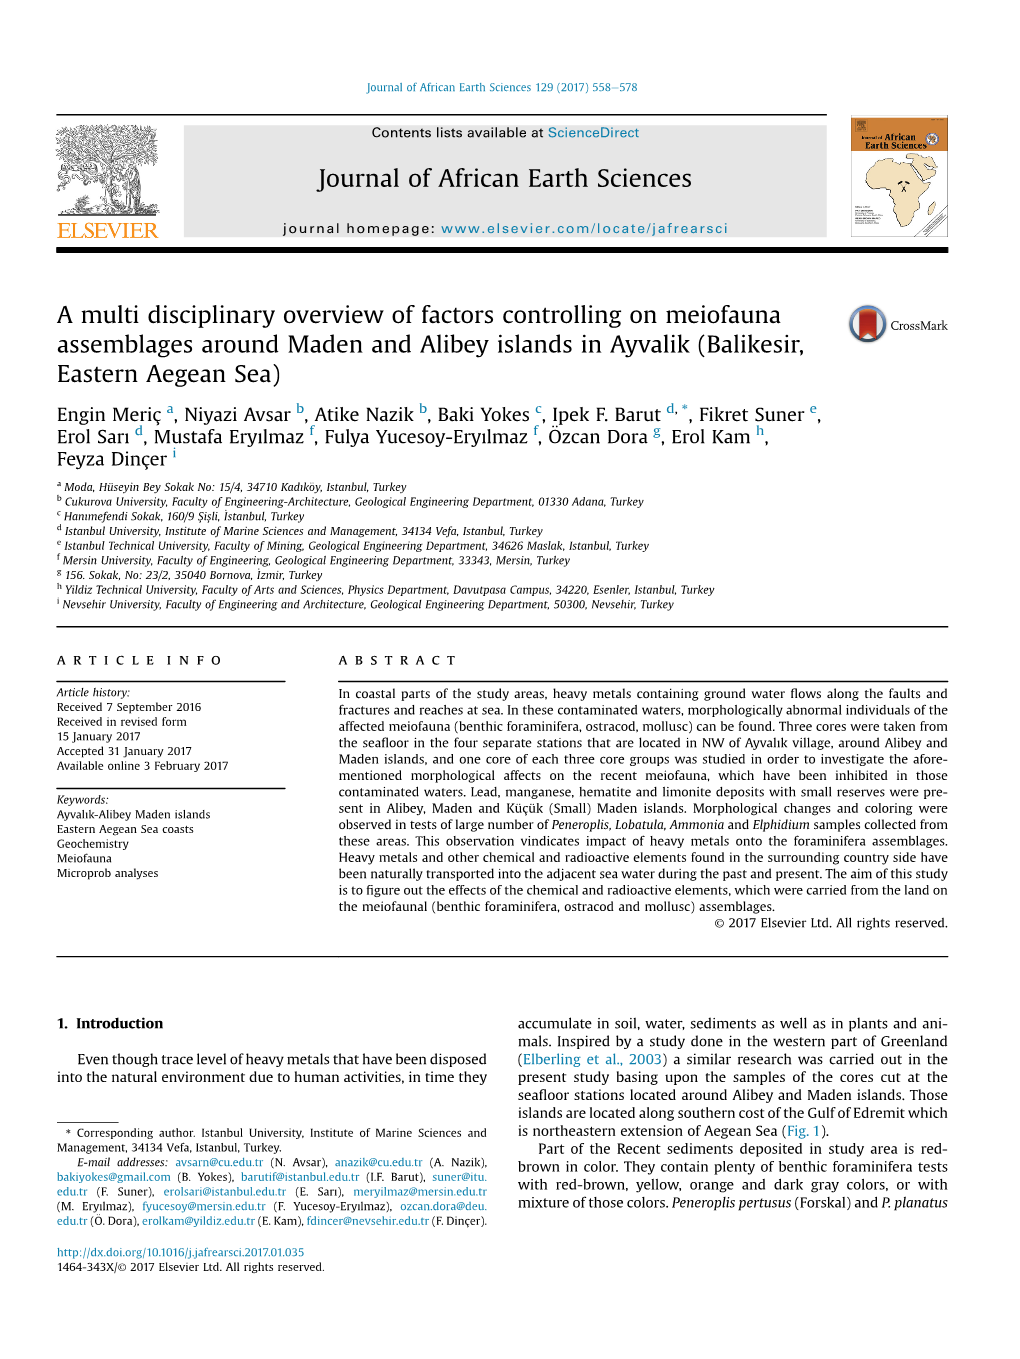 A Multi Disciplinary Overview of Factors Controlling on Meiofauna Assemblages Around Maden and Alibey Islands in Ayvalik (Balikesir, Eastern Aegean Sea)